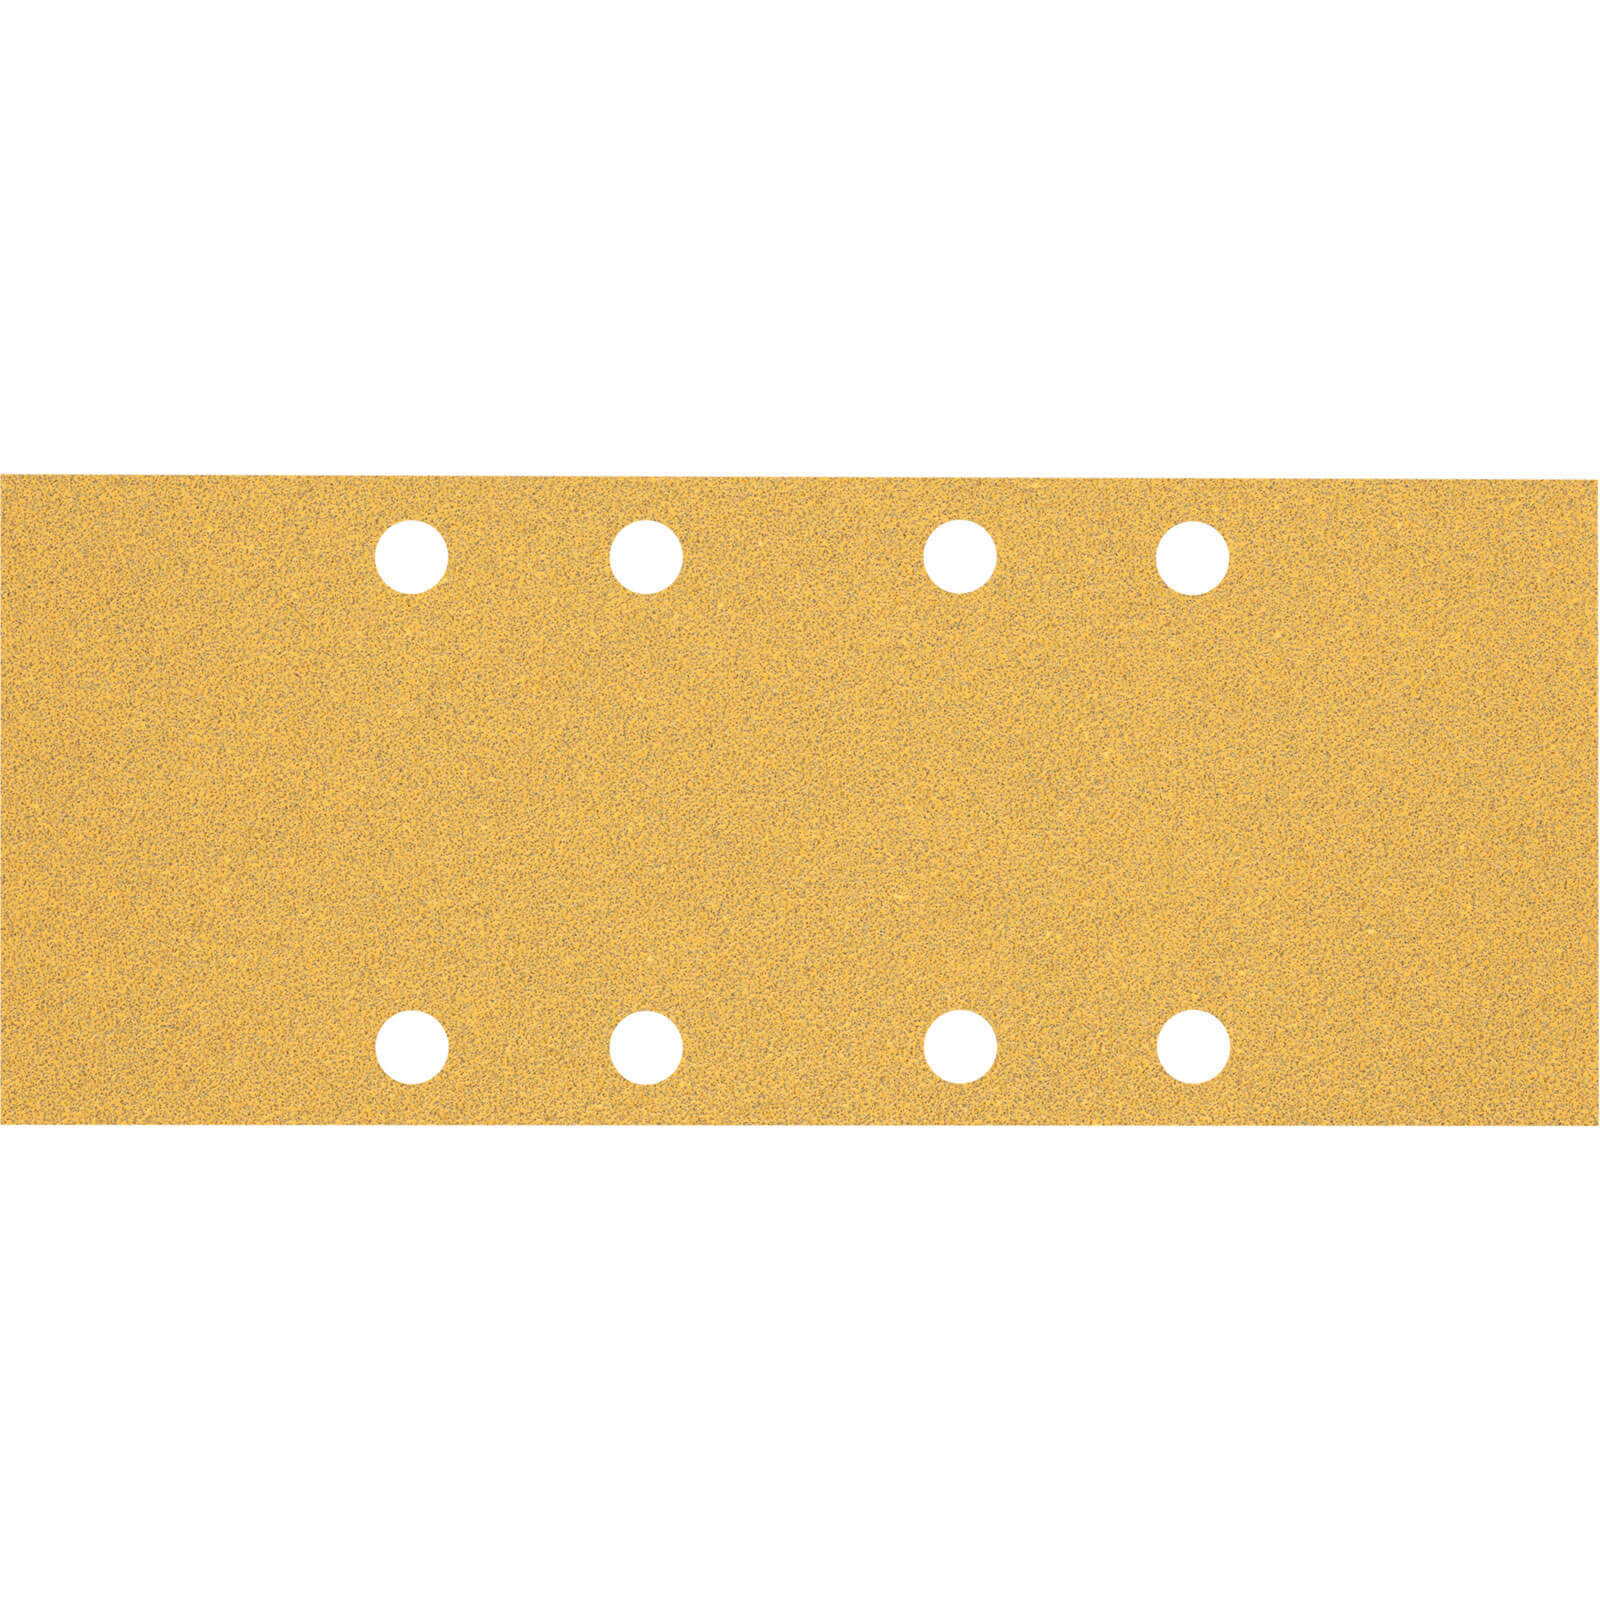 Image of Bosch Expert C470 Best for Wood and Paint Sanding Sheets 93mm x 230mm 60g Pack of 10